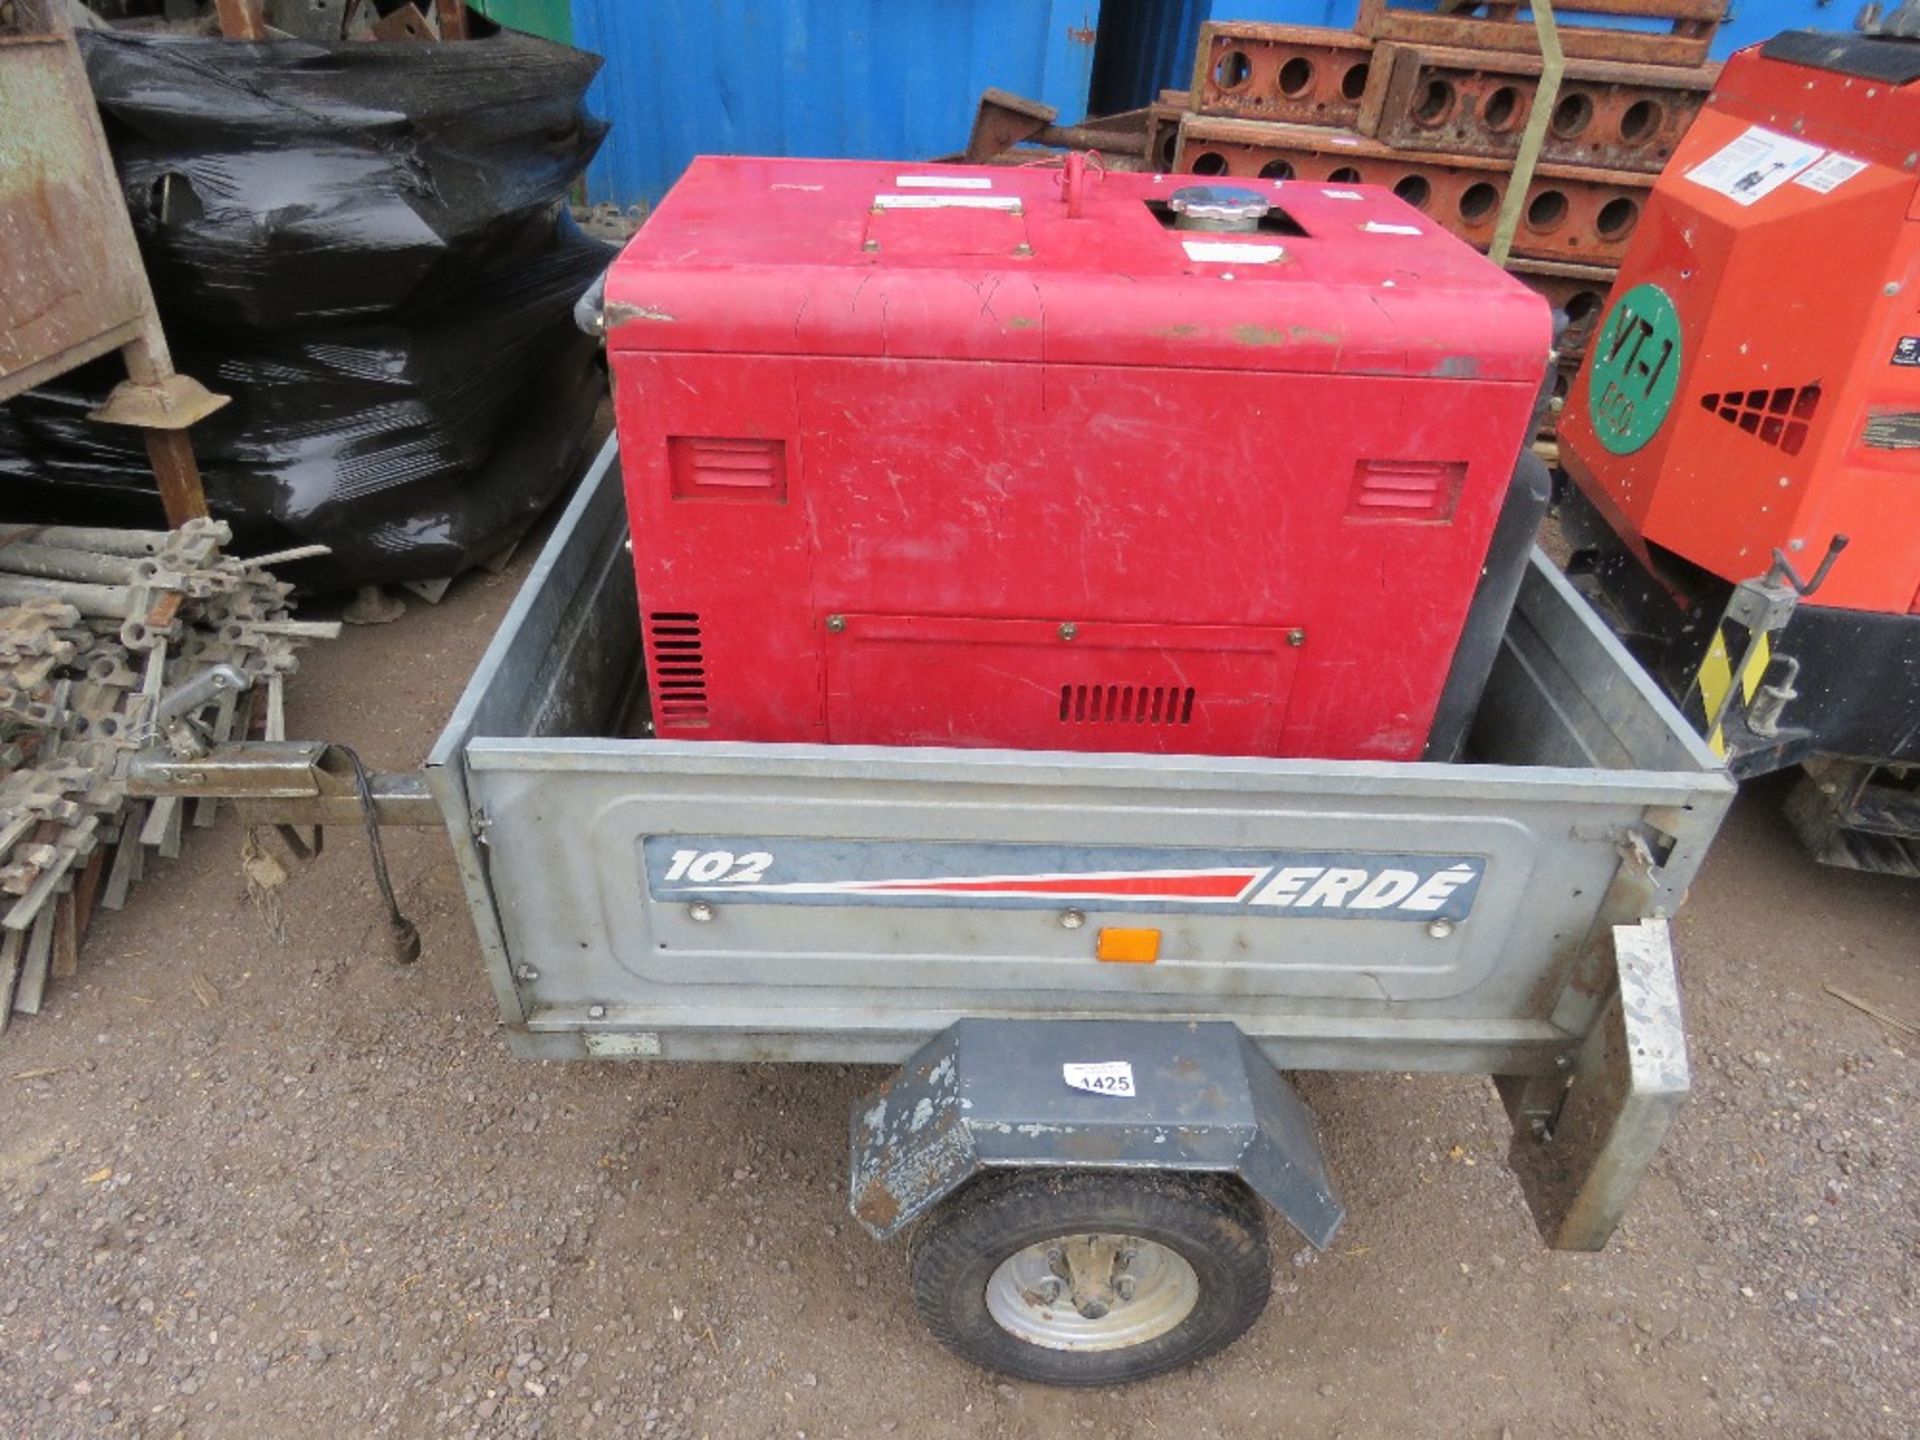 ERDE SMALL TRAILER WITH A DIESEL GENERATOR, 6KVA APPROX.